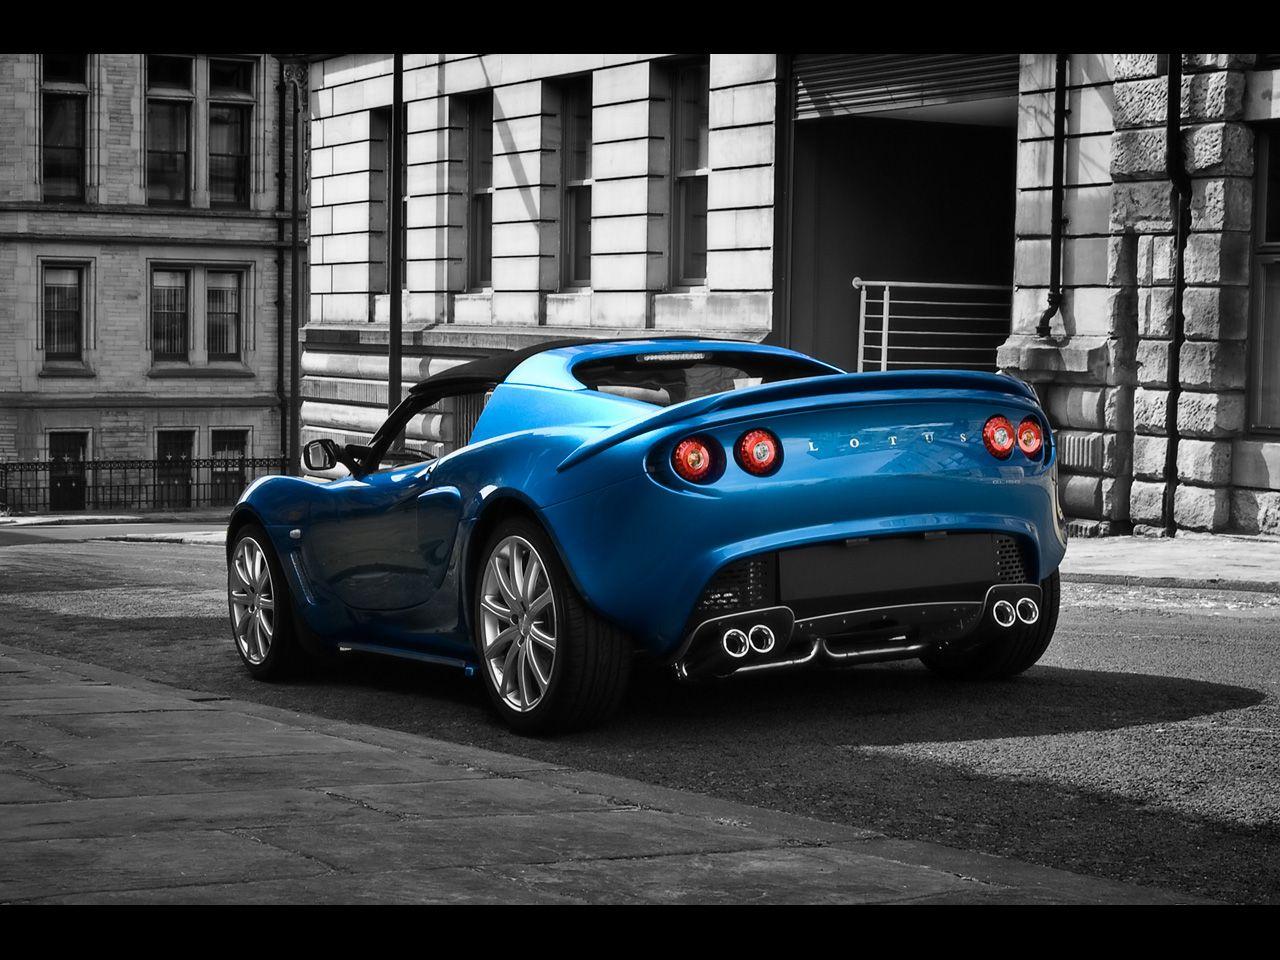 lotus elise. Cars to Drool Over. Lotus